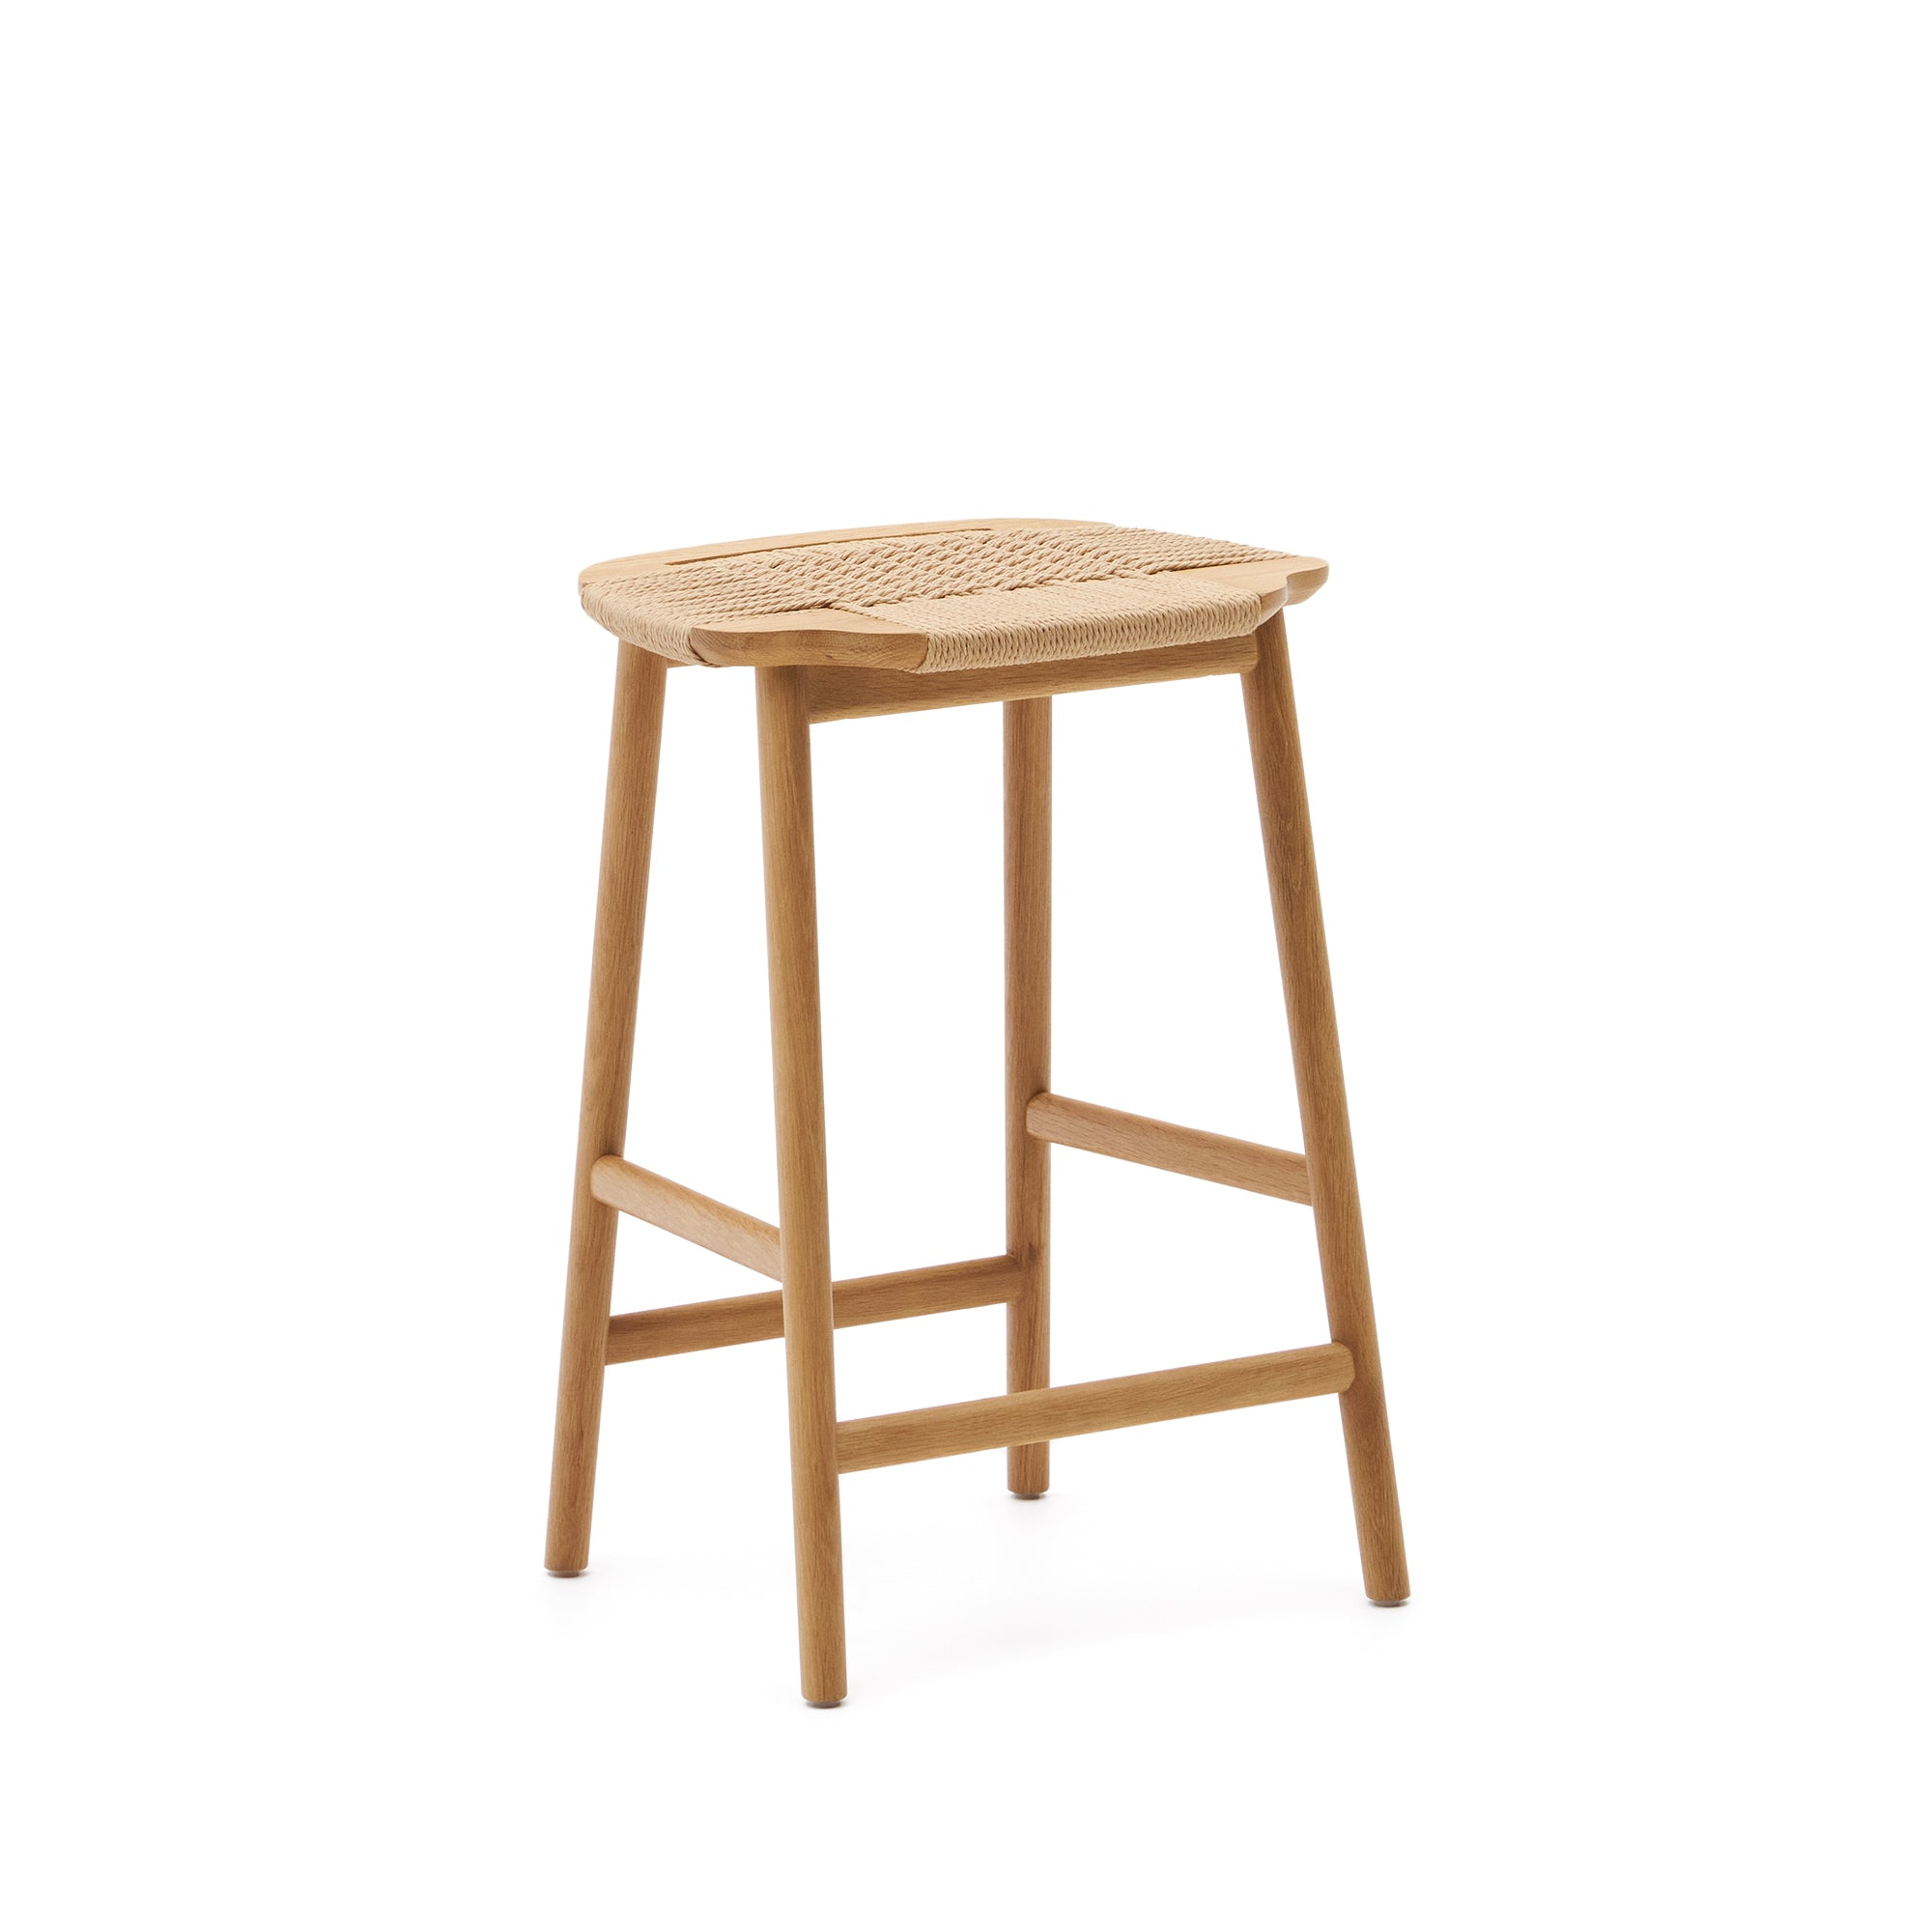 Enit stool made of beige paper cord and solid oak wood with natural finish, 65cm FSC Mix Credit